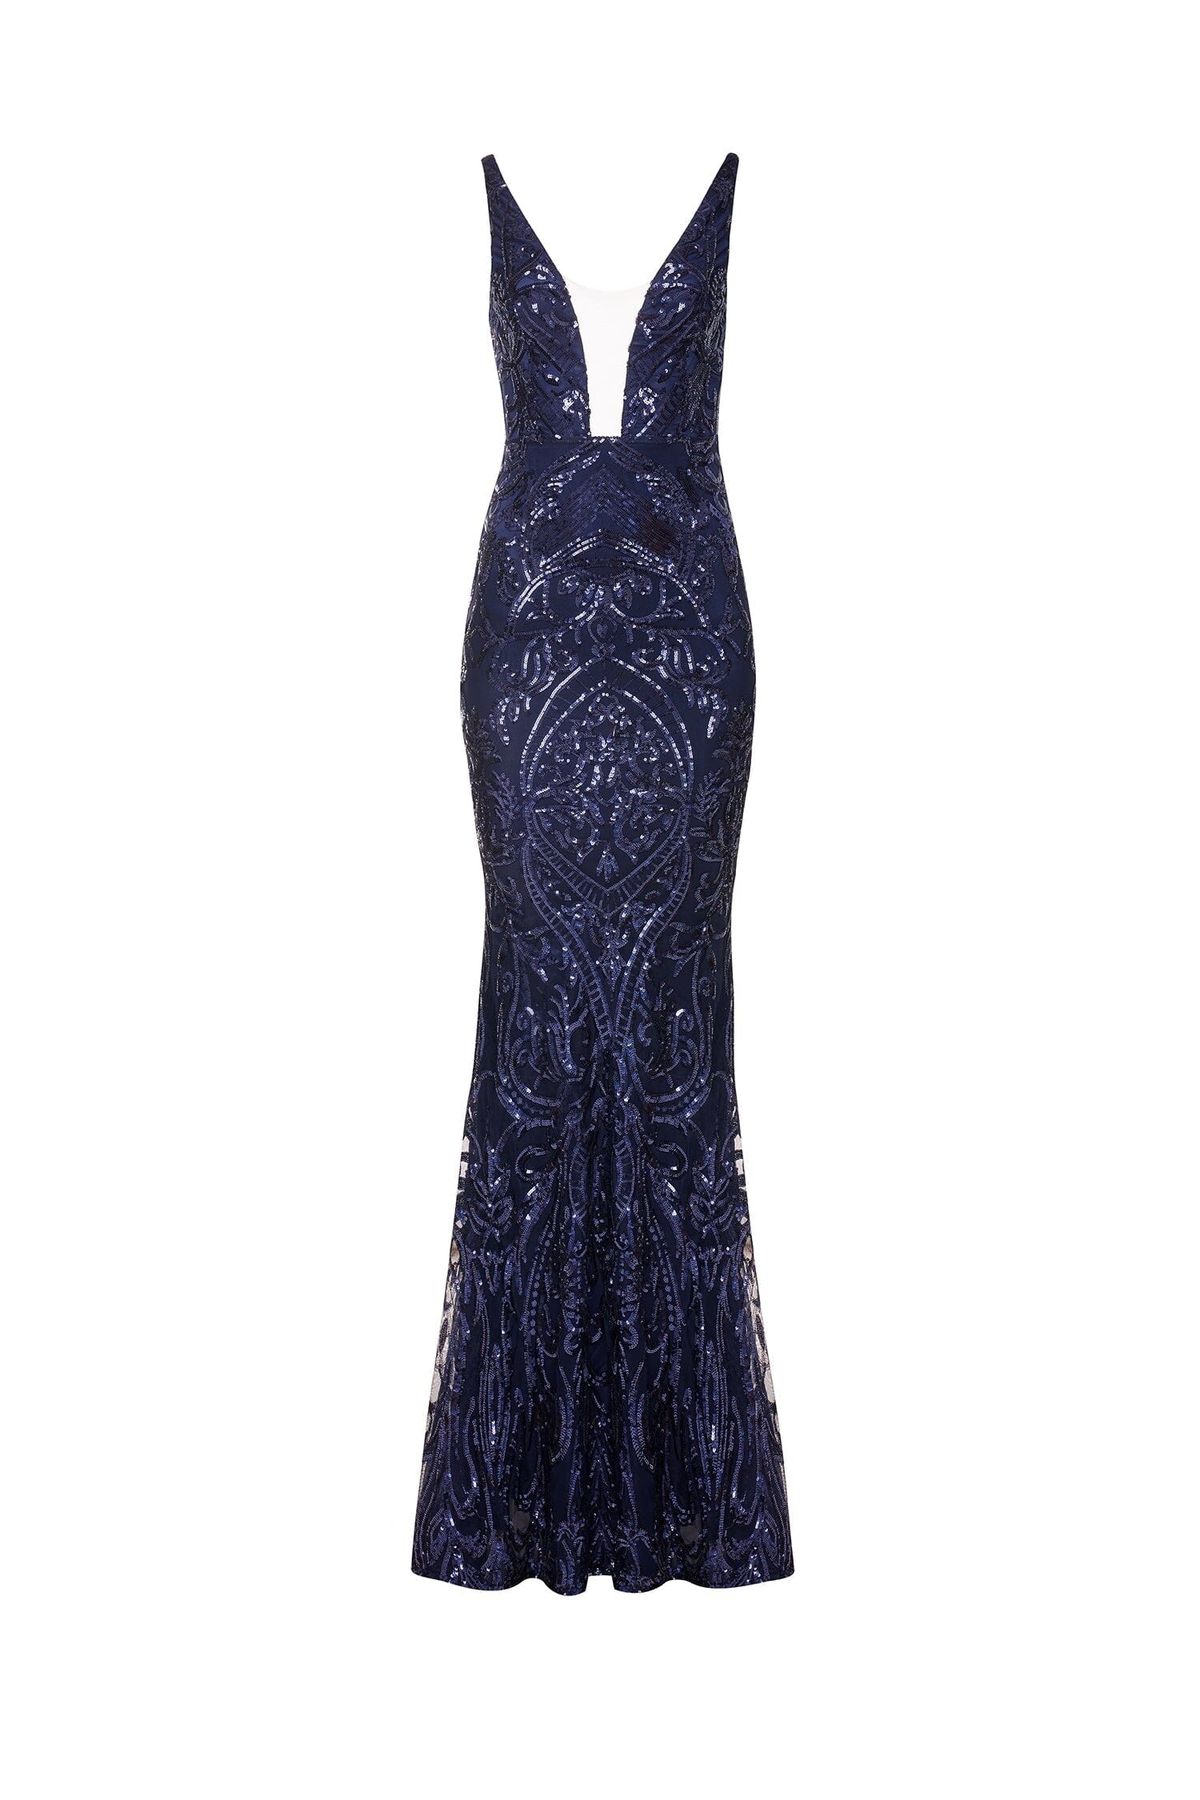 Style Salma Alamour The Label Size XL Prom Plunge Sheer Navy Blue Mermaid Dress on Queenly